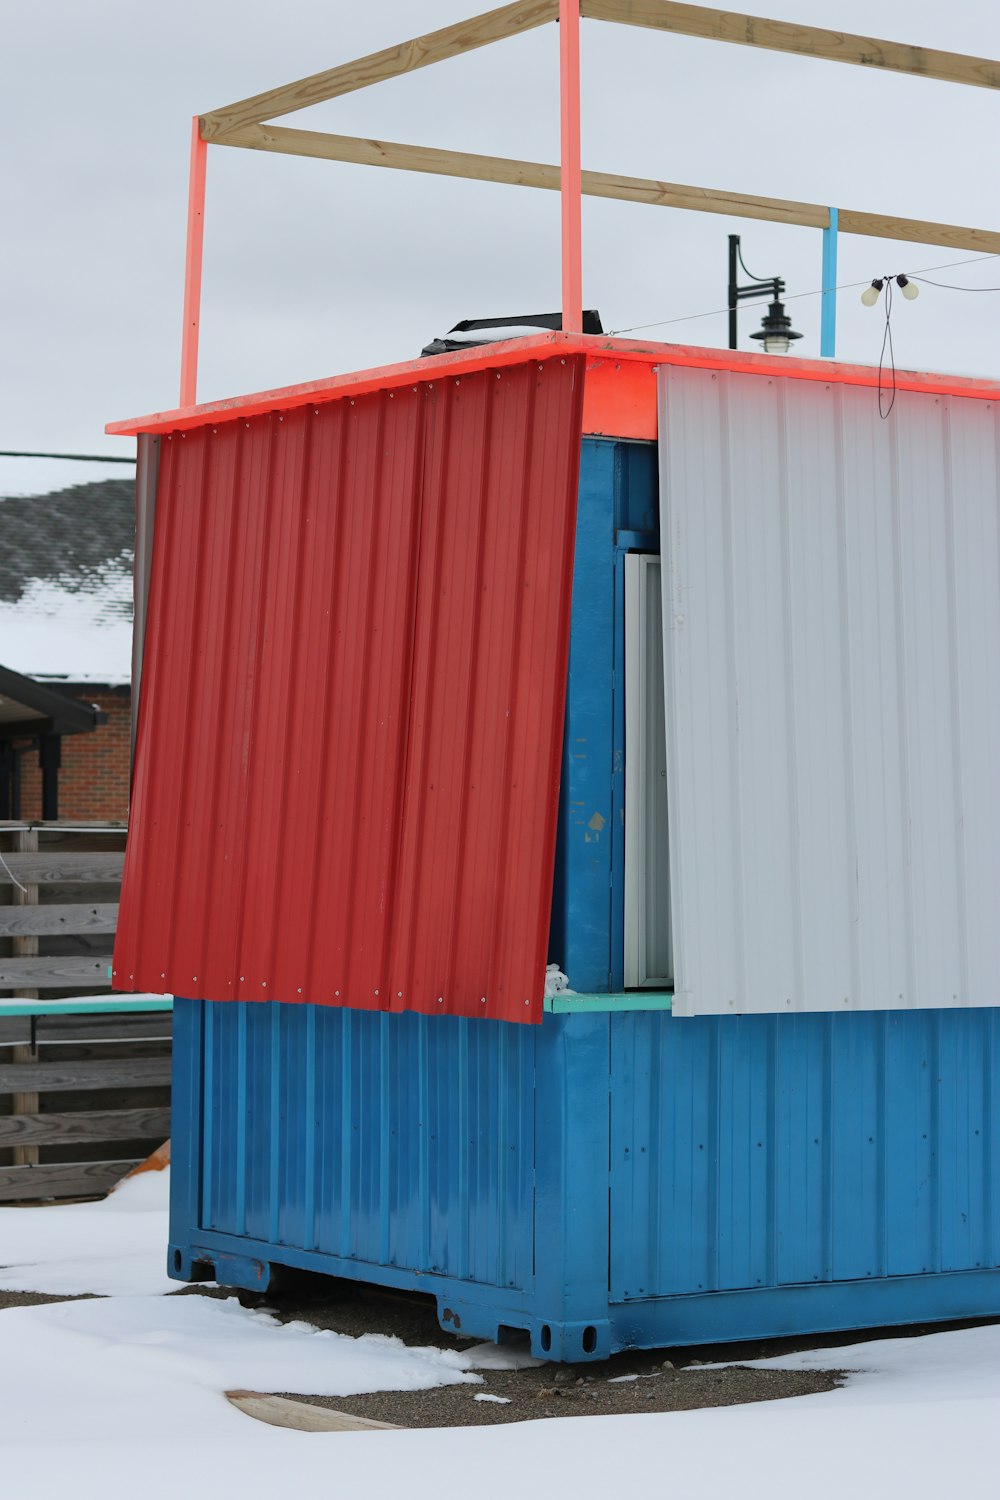 a red, white and blue building sitting in the snow